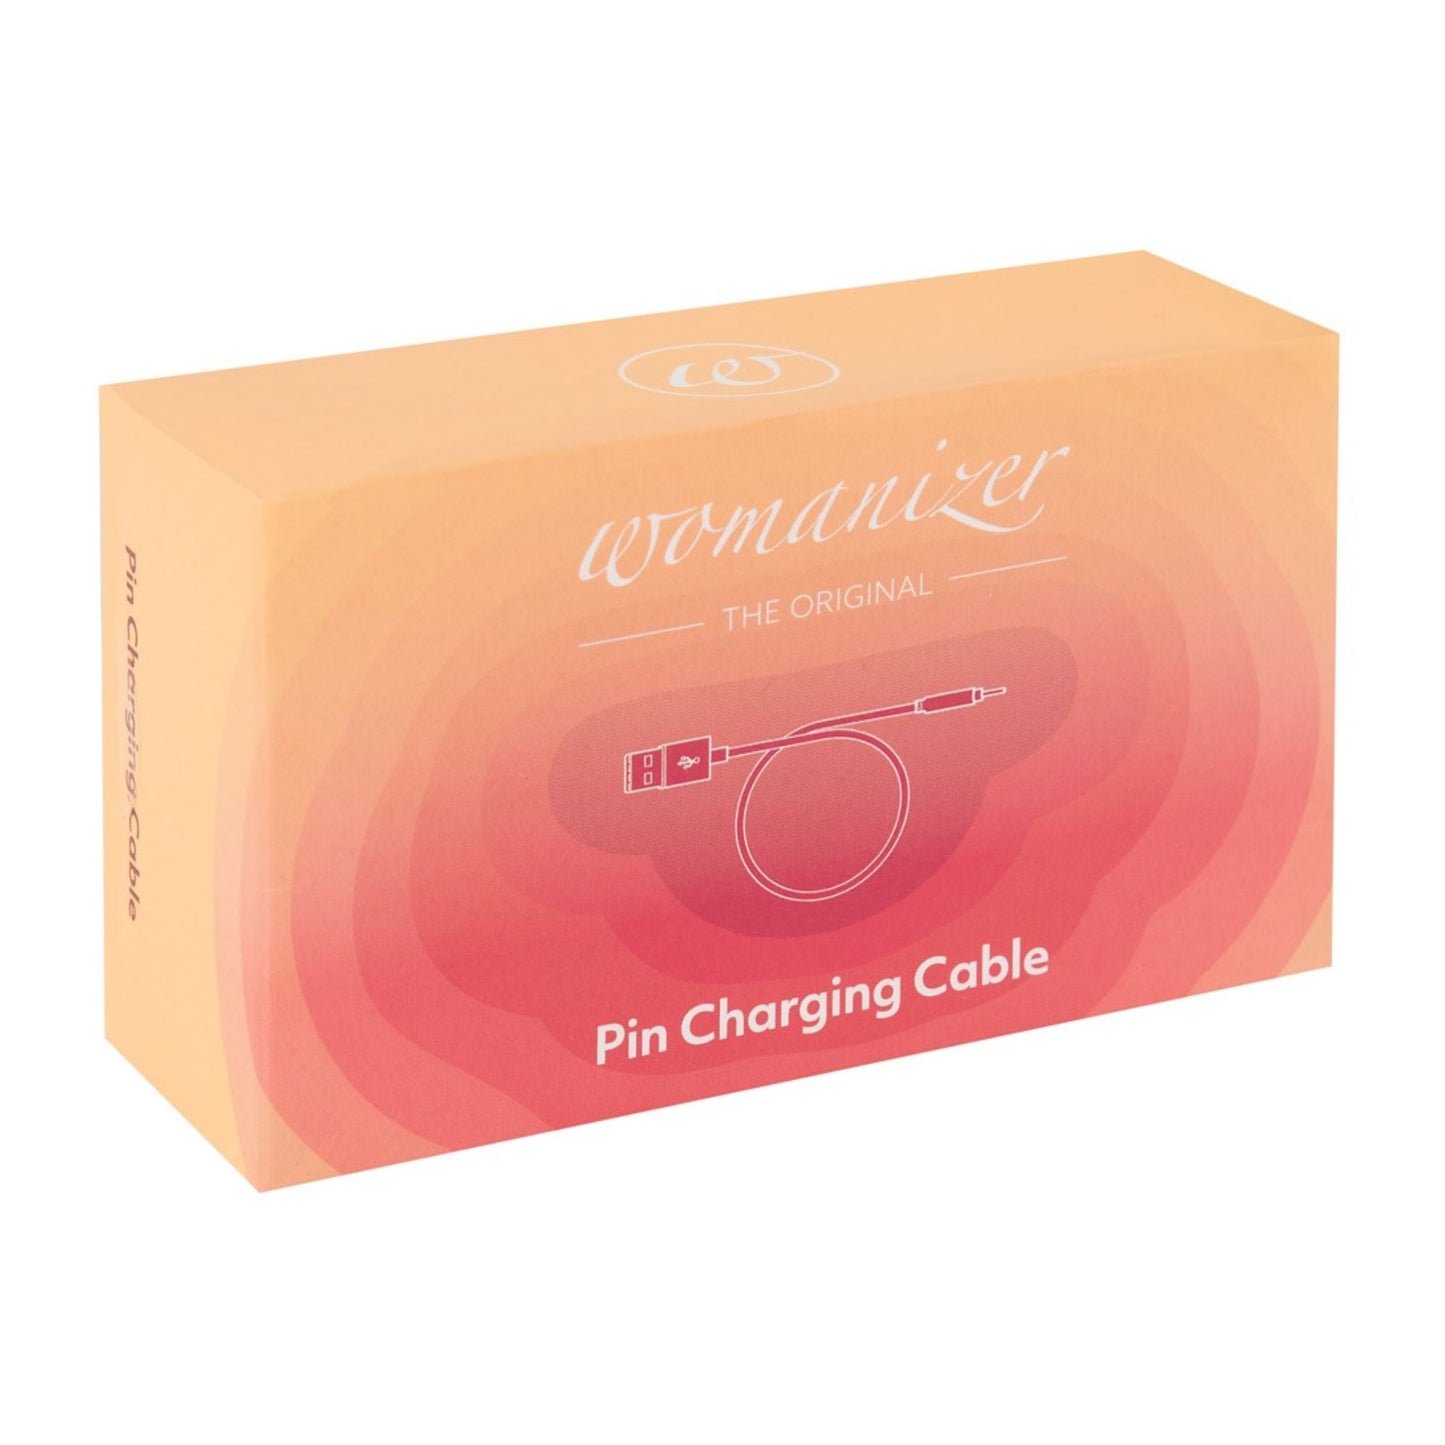 Ladekabel „Pin Charging Cable“ für Womanizer - OH MY! FANTASY